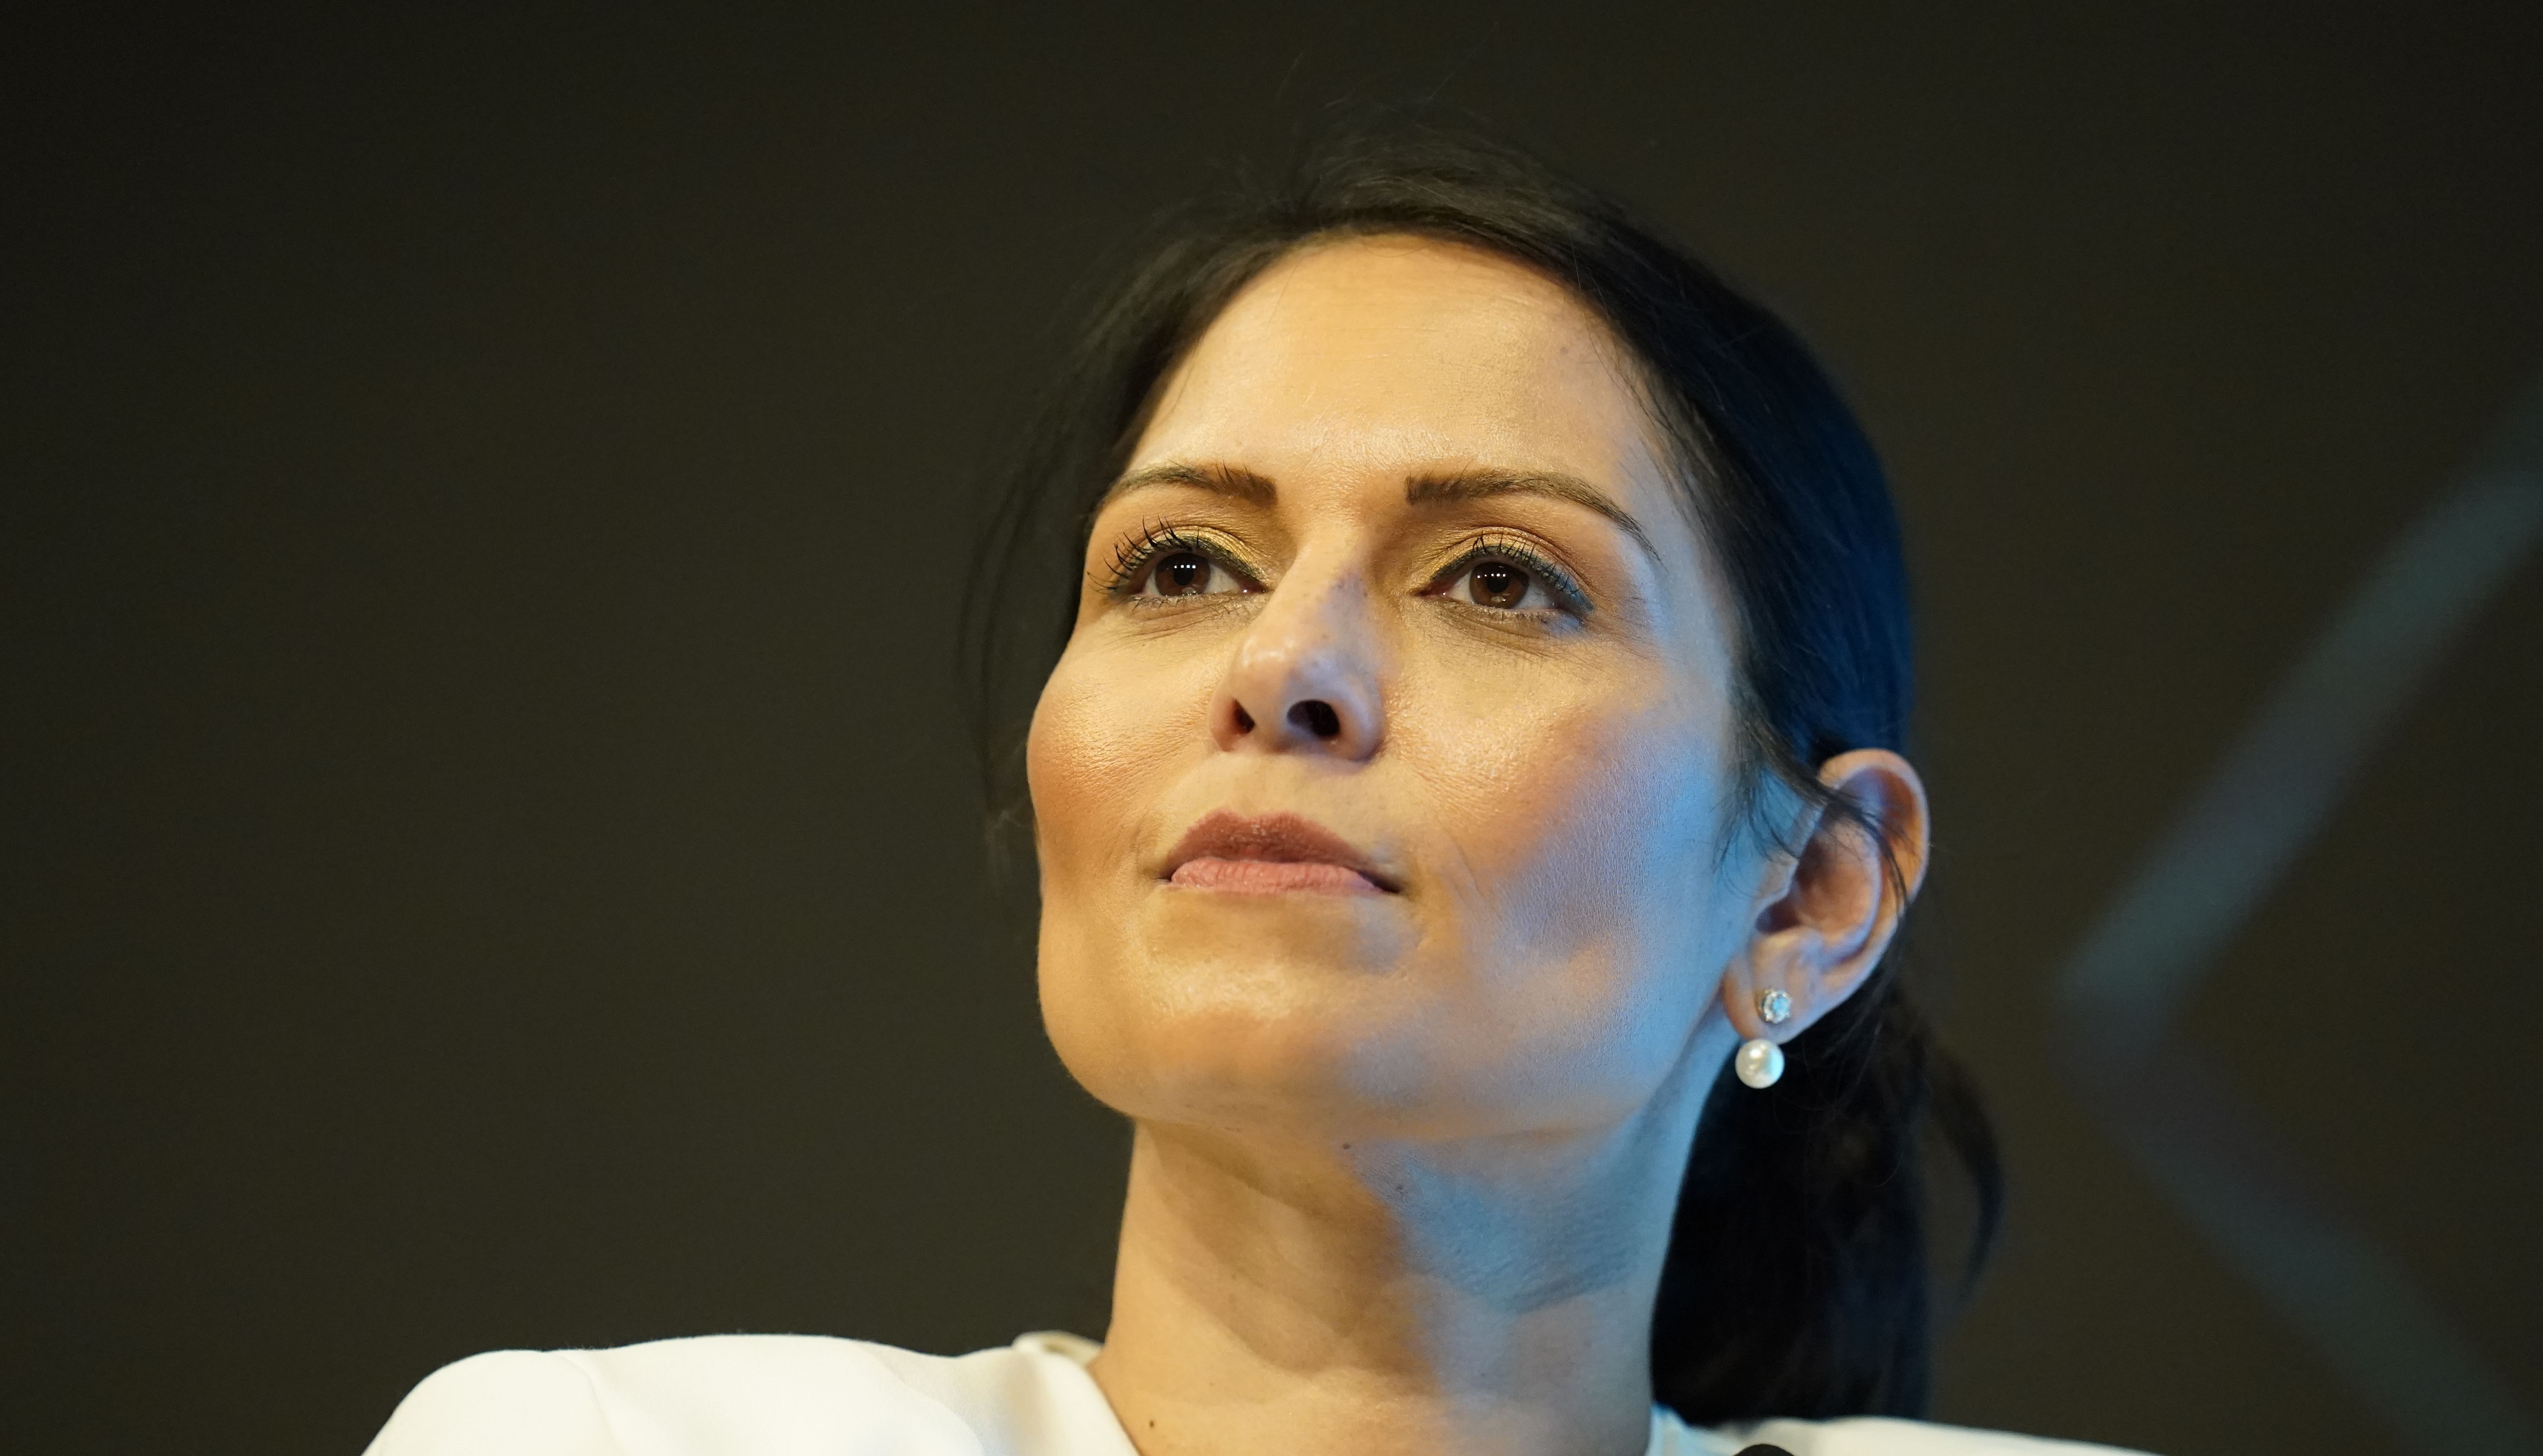 Home Secretary Priti Patel must now decide how their bids to enter the UK should be dealt with